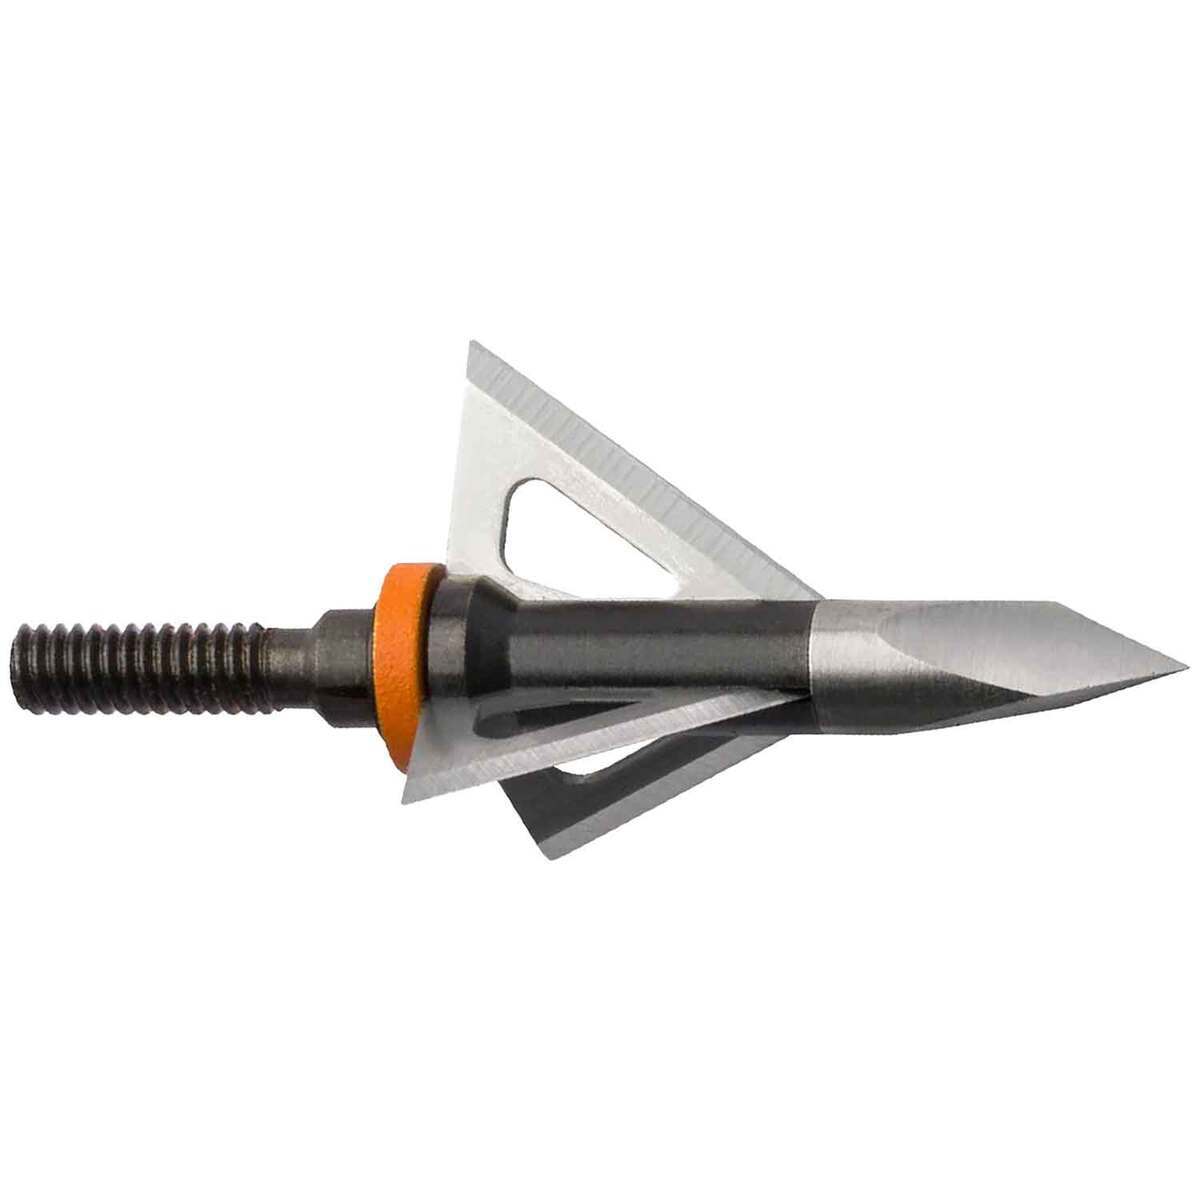 Wasp Drone 100gr Fixed Broadhead 3 Pack Sportsmans Warehouse 0653